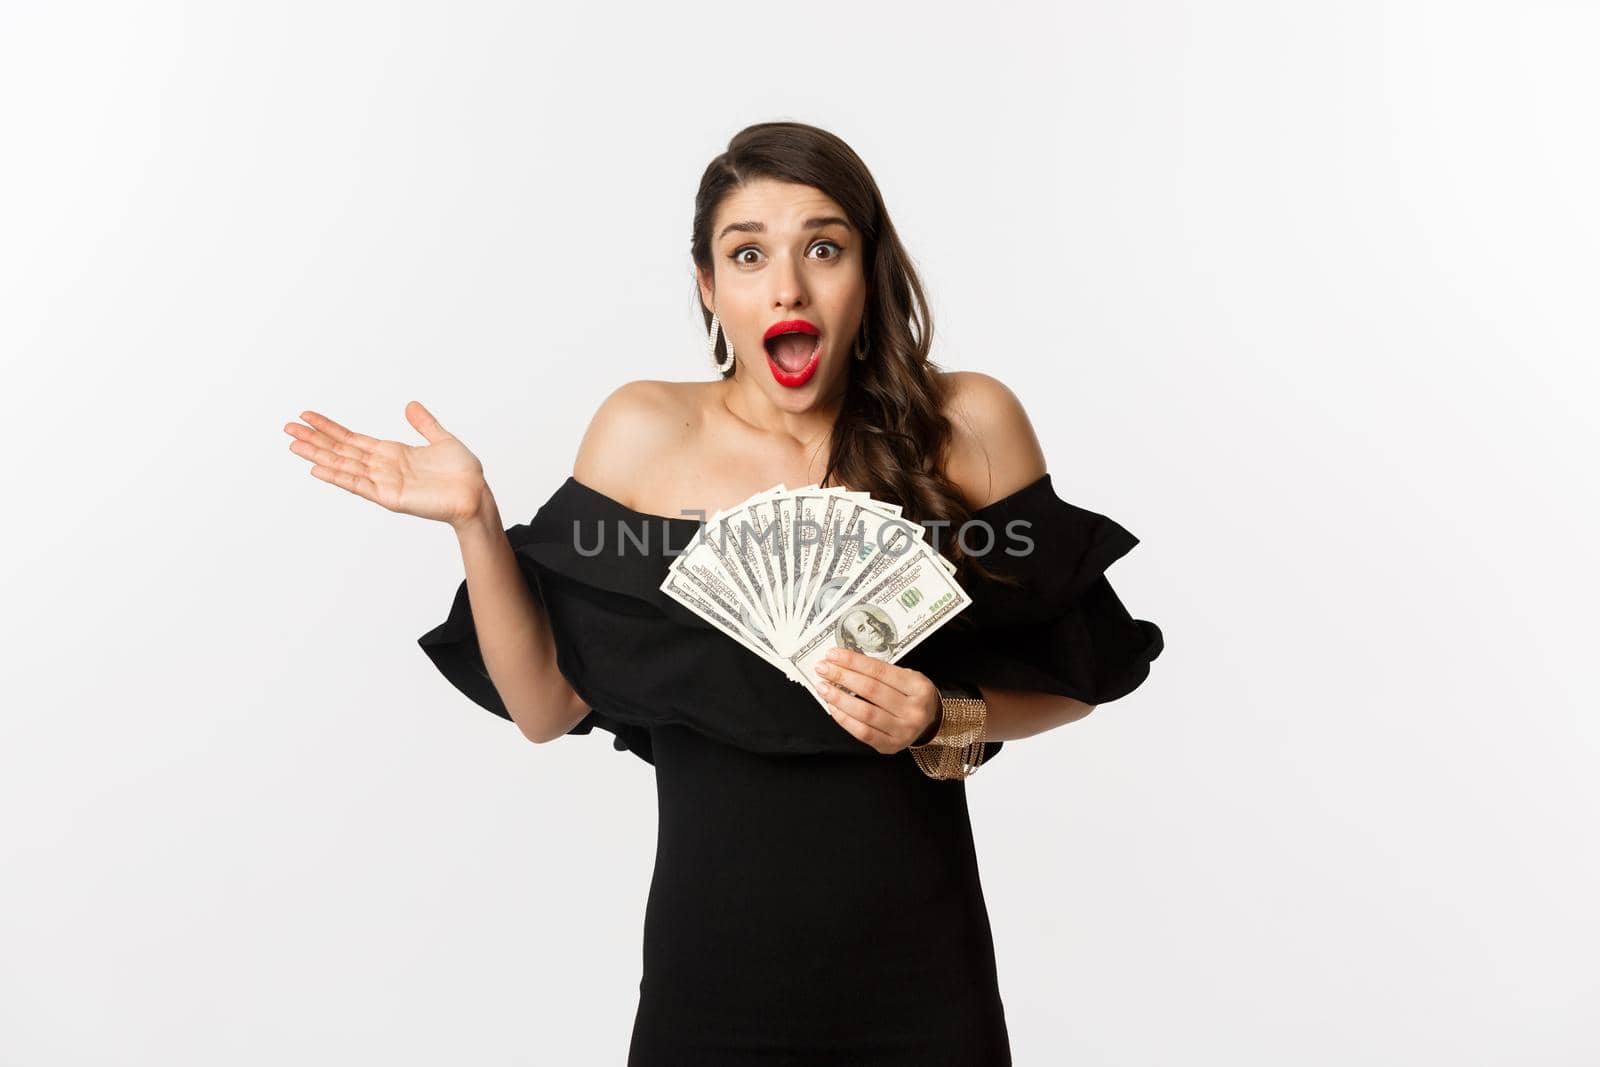 Beauty and shopping concept. Excited lucky woman winning money, looking amazed and holding dollars, standing over white background.